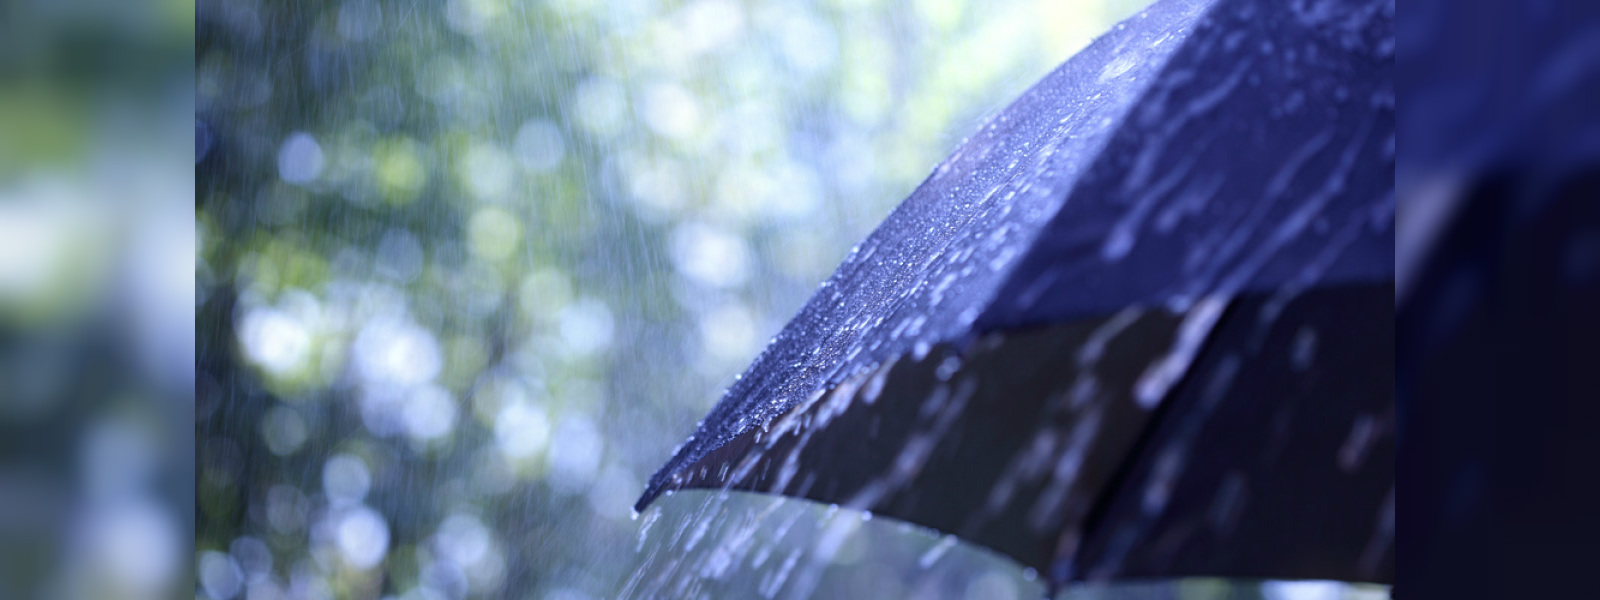 Rain expected in most parts of the island